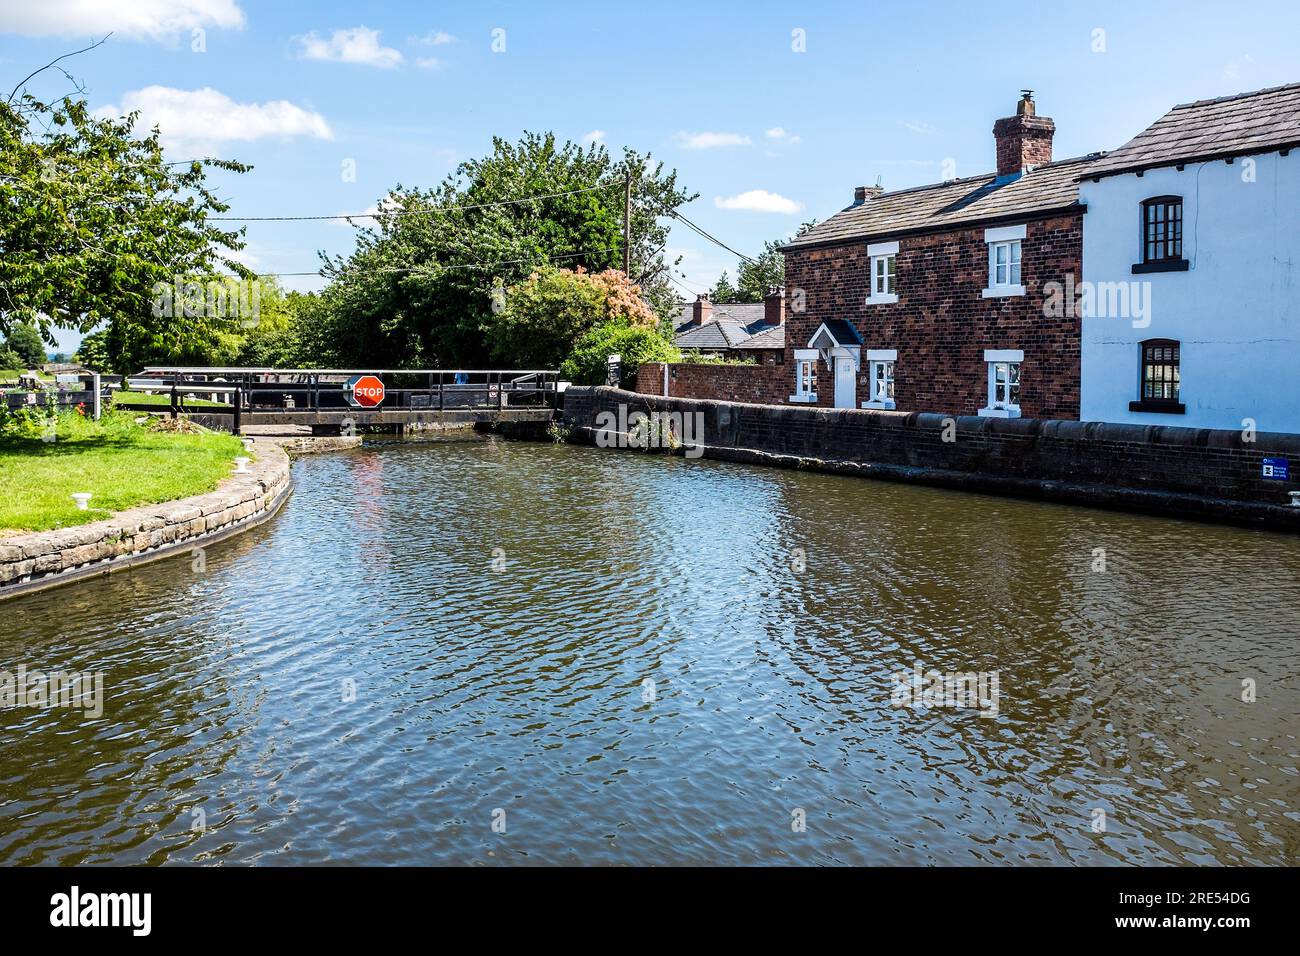 Top Lock is the start of the Rufford Branch of the Leeds - Liverpool Canal. Stock Photo